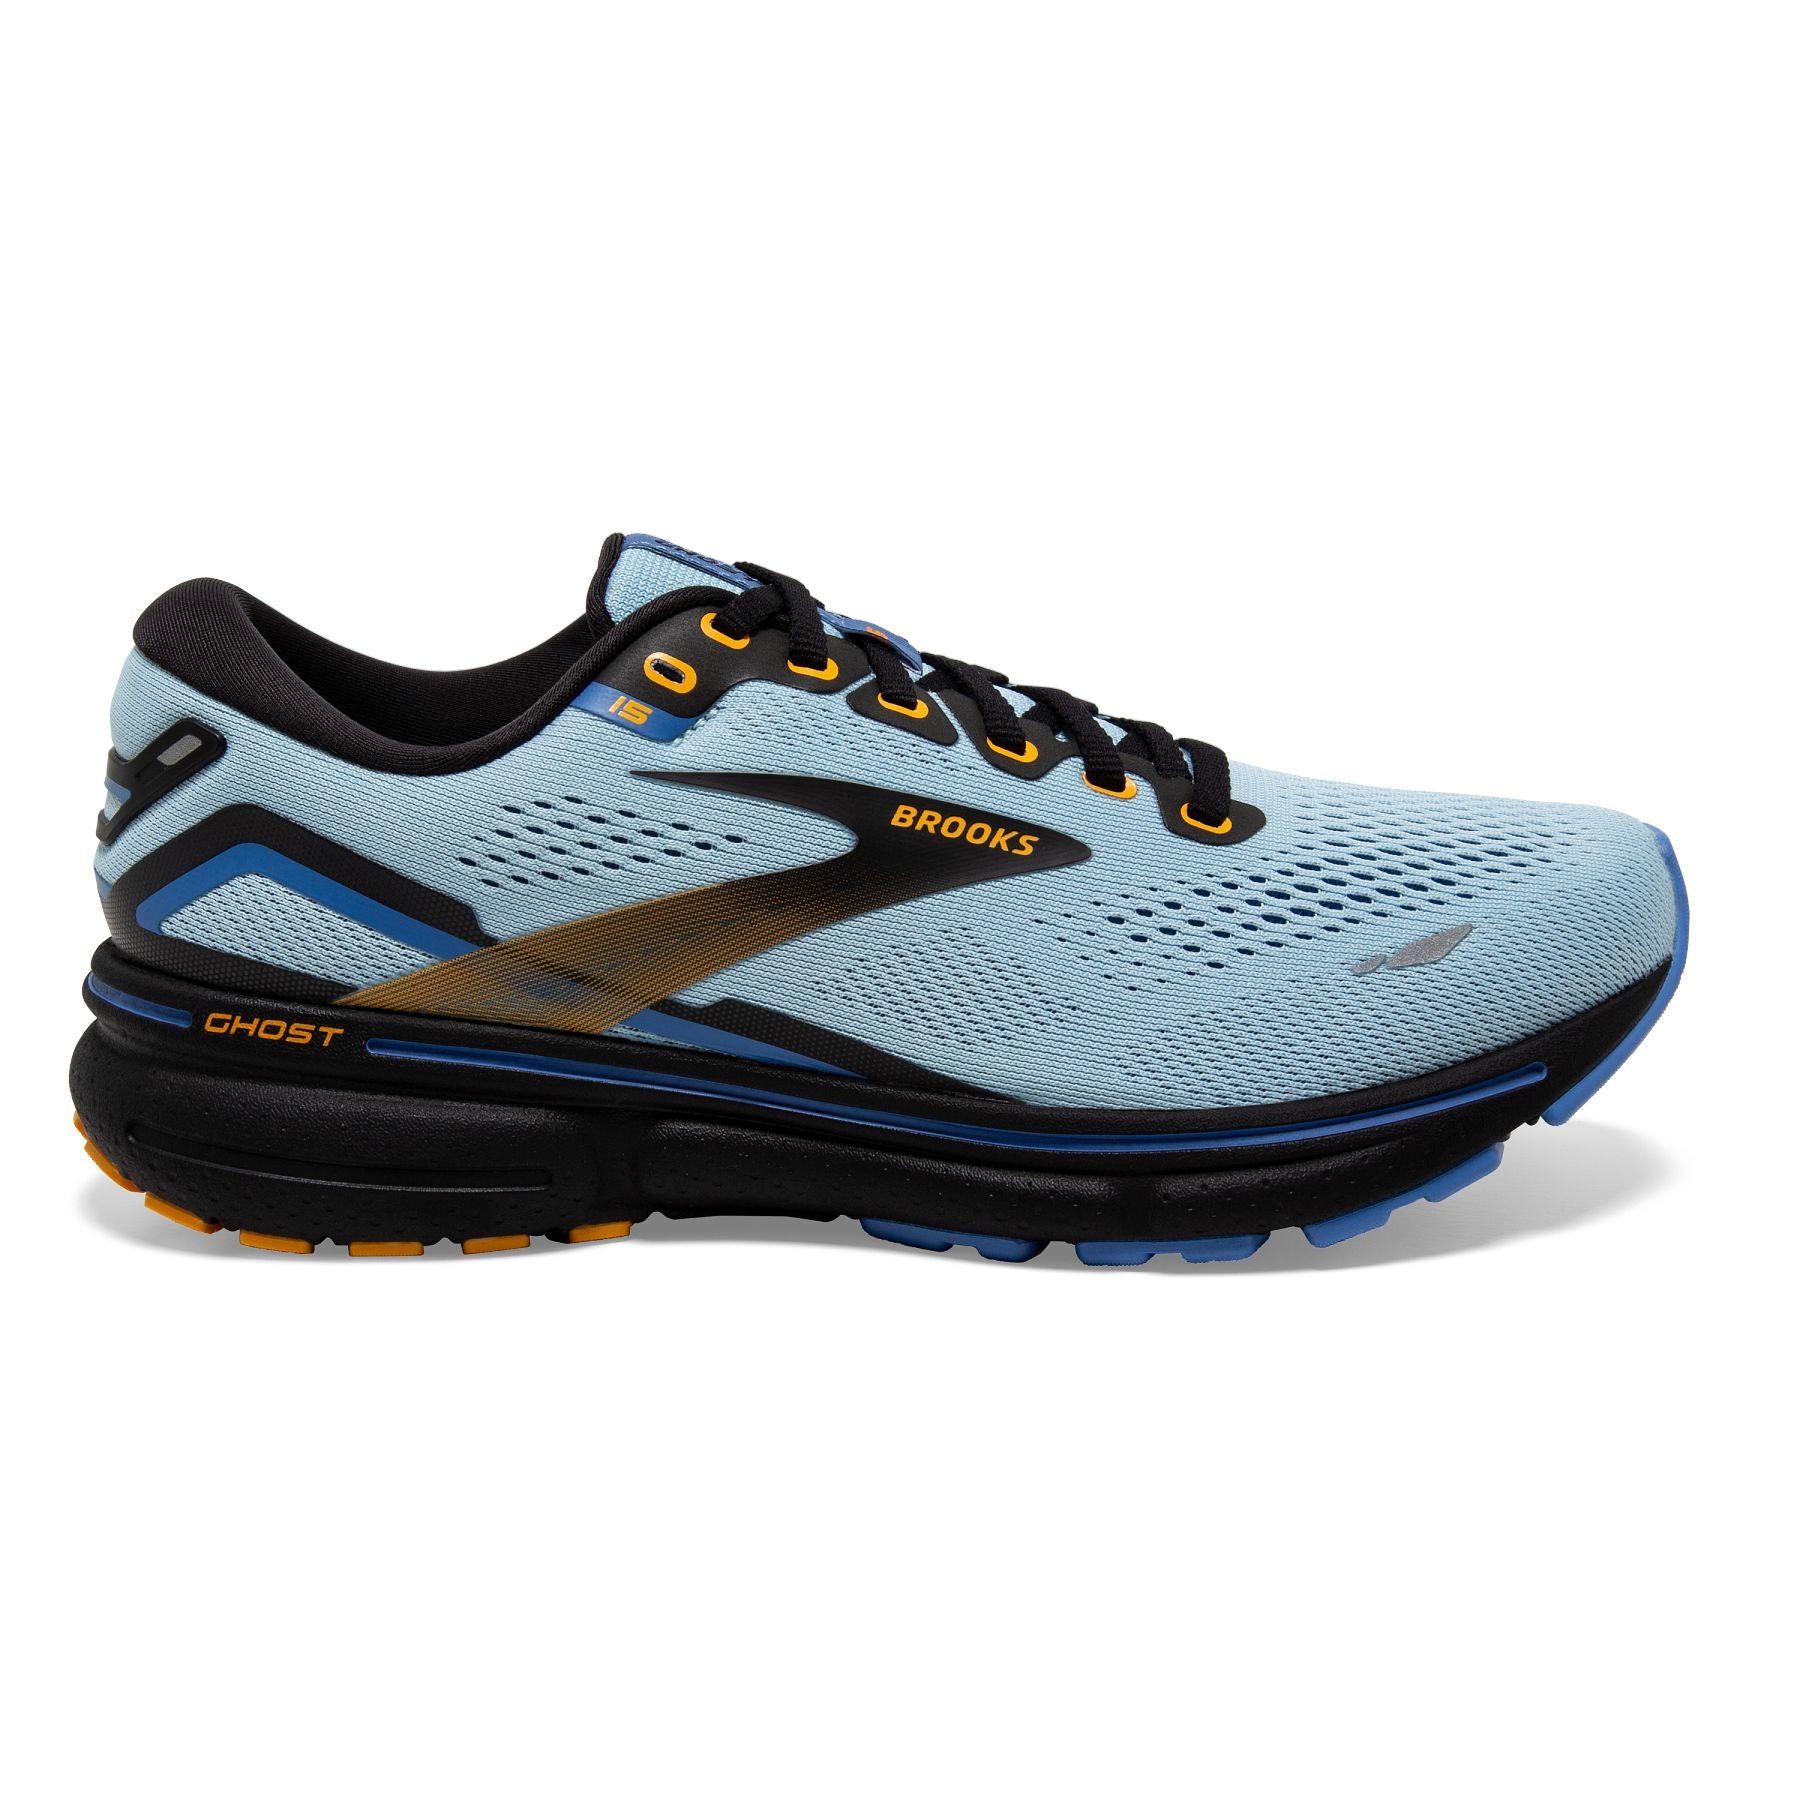 Lateral view of the Women's Ghost 15 by Brooks in the color Light Blue/Black/Yellow